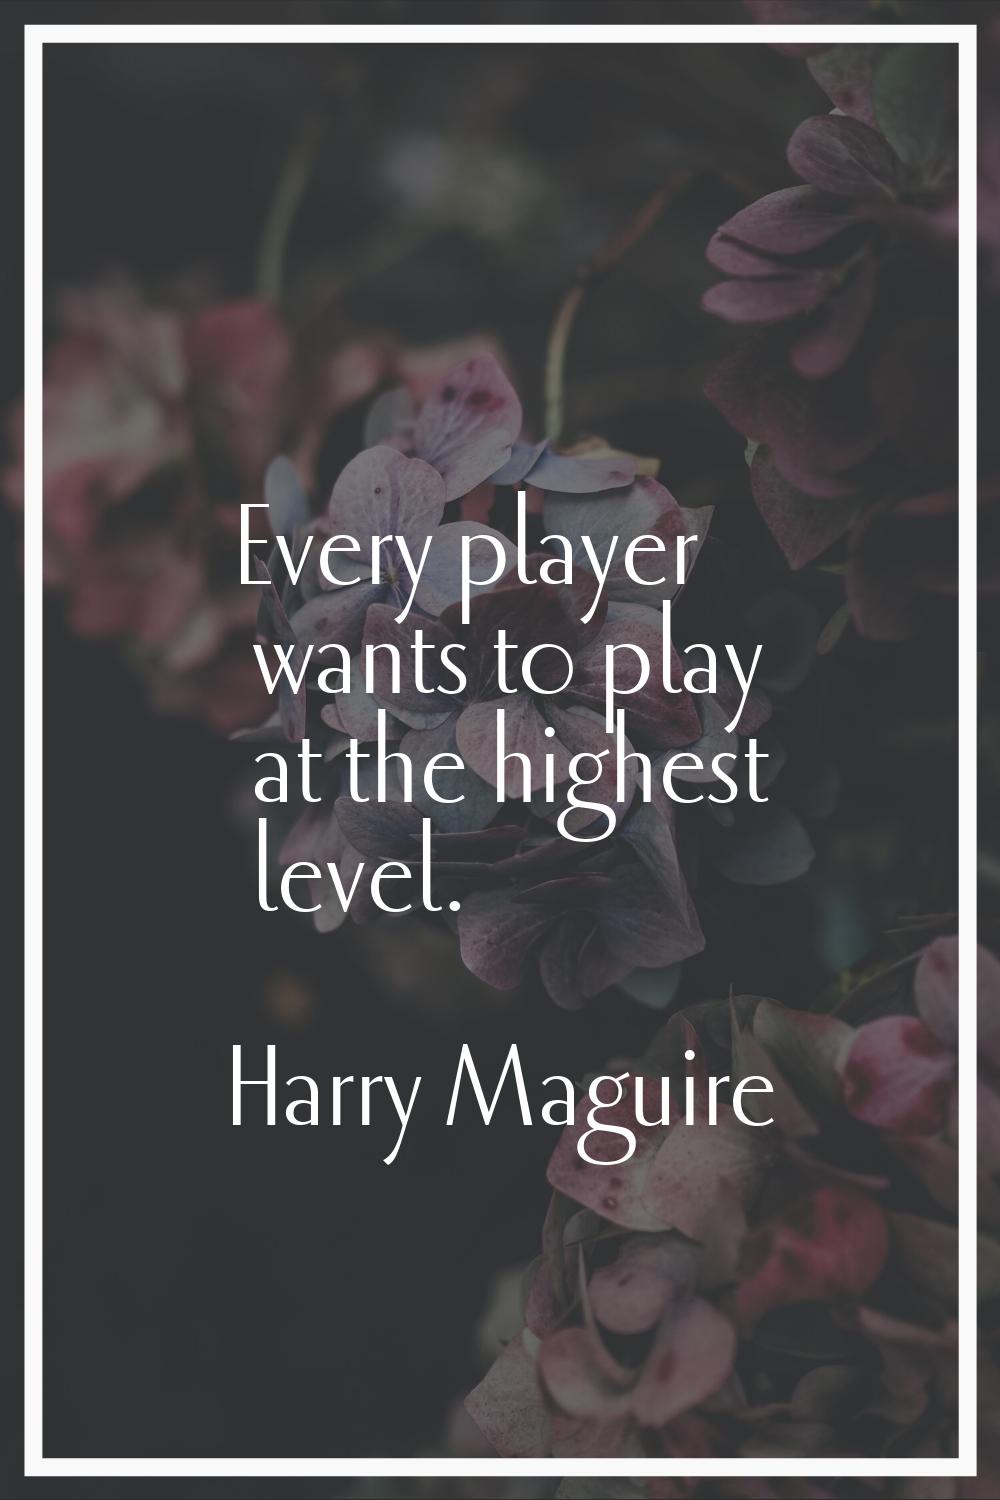 Every player wants to play at the highest level.